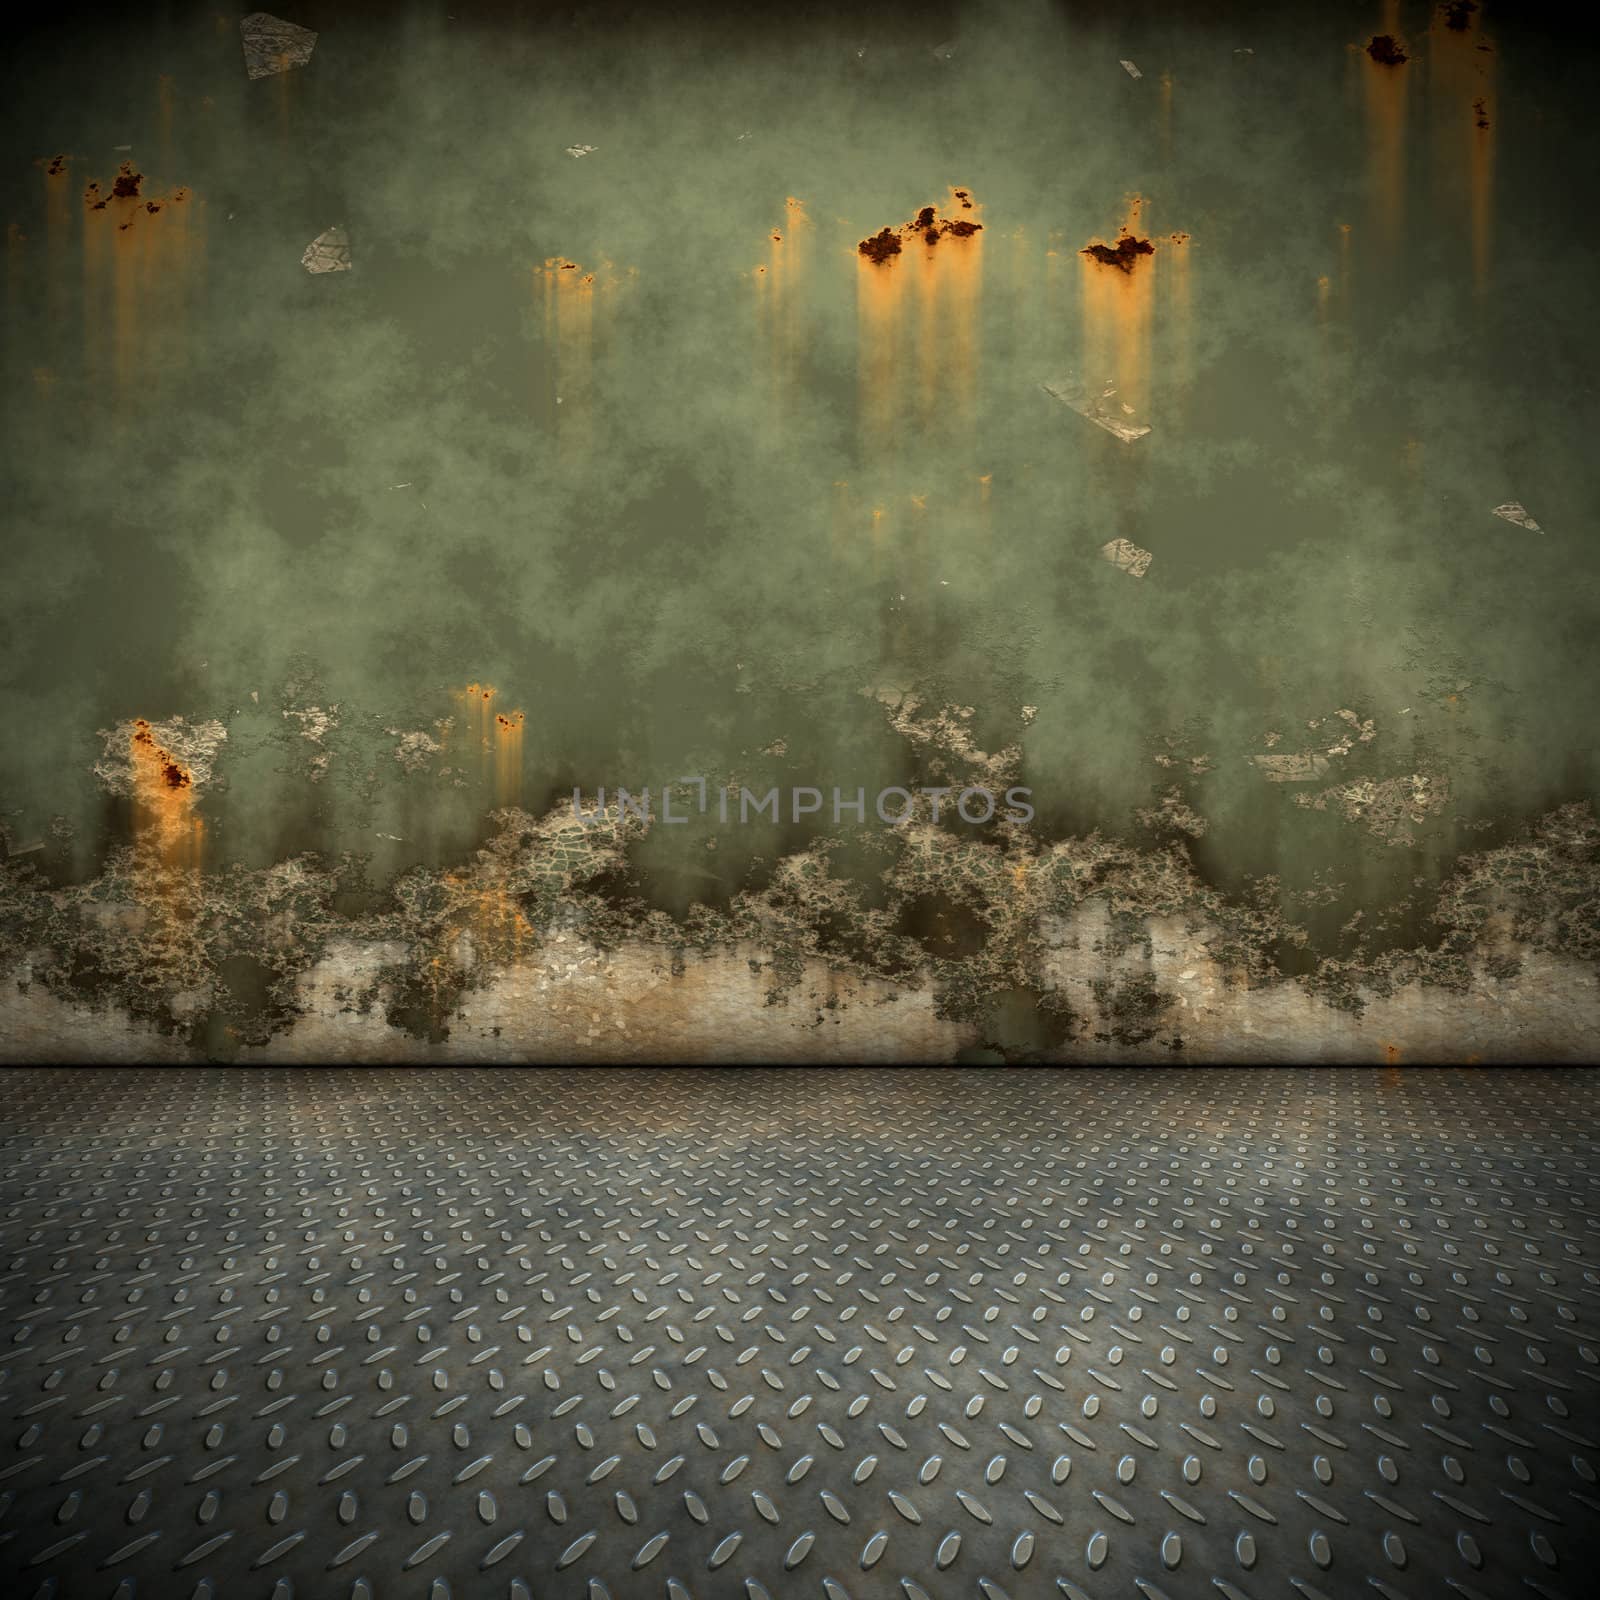 An image of a nice steel floor background